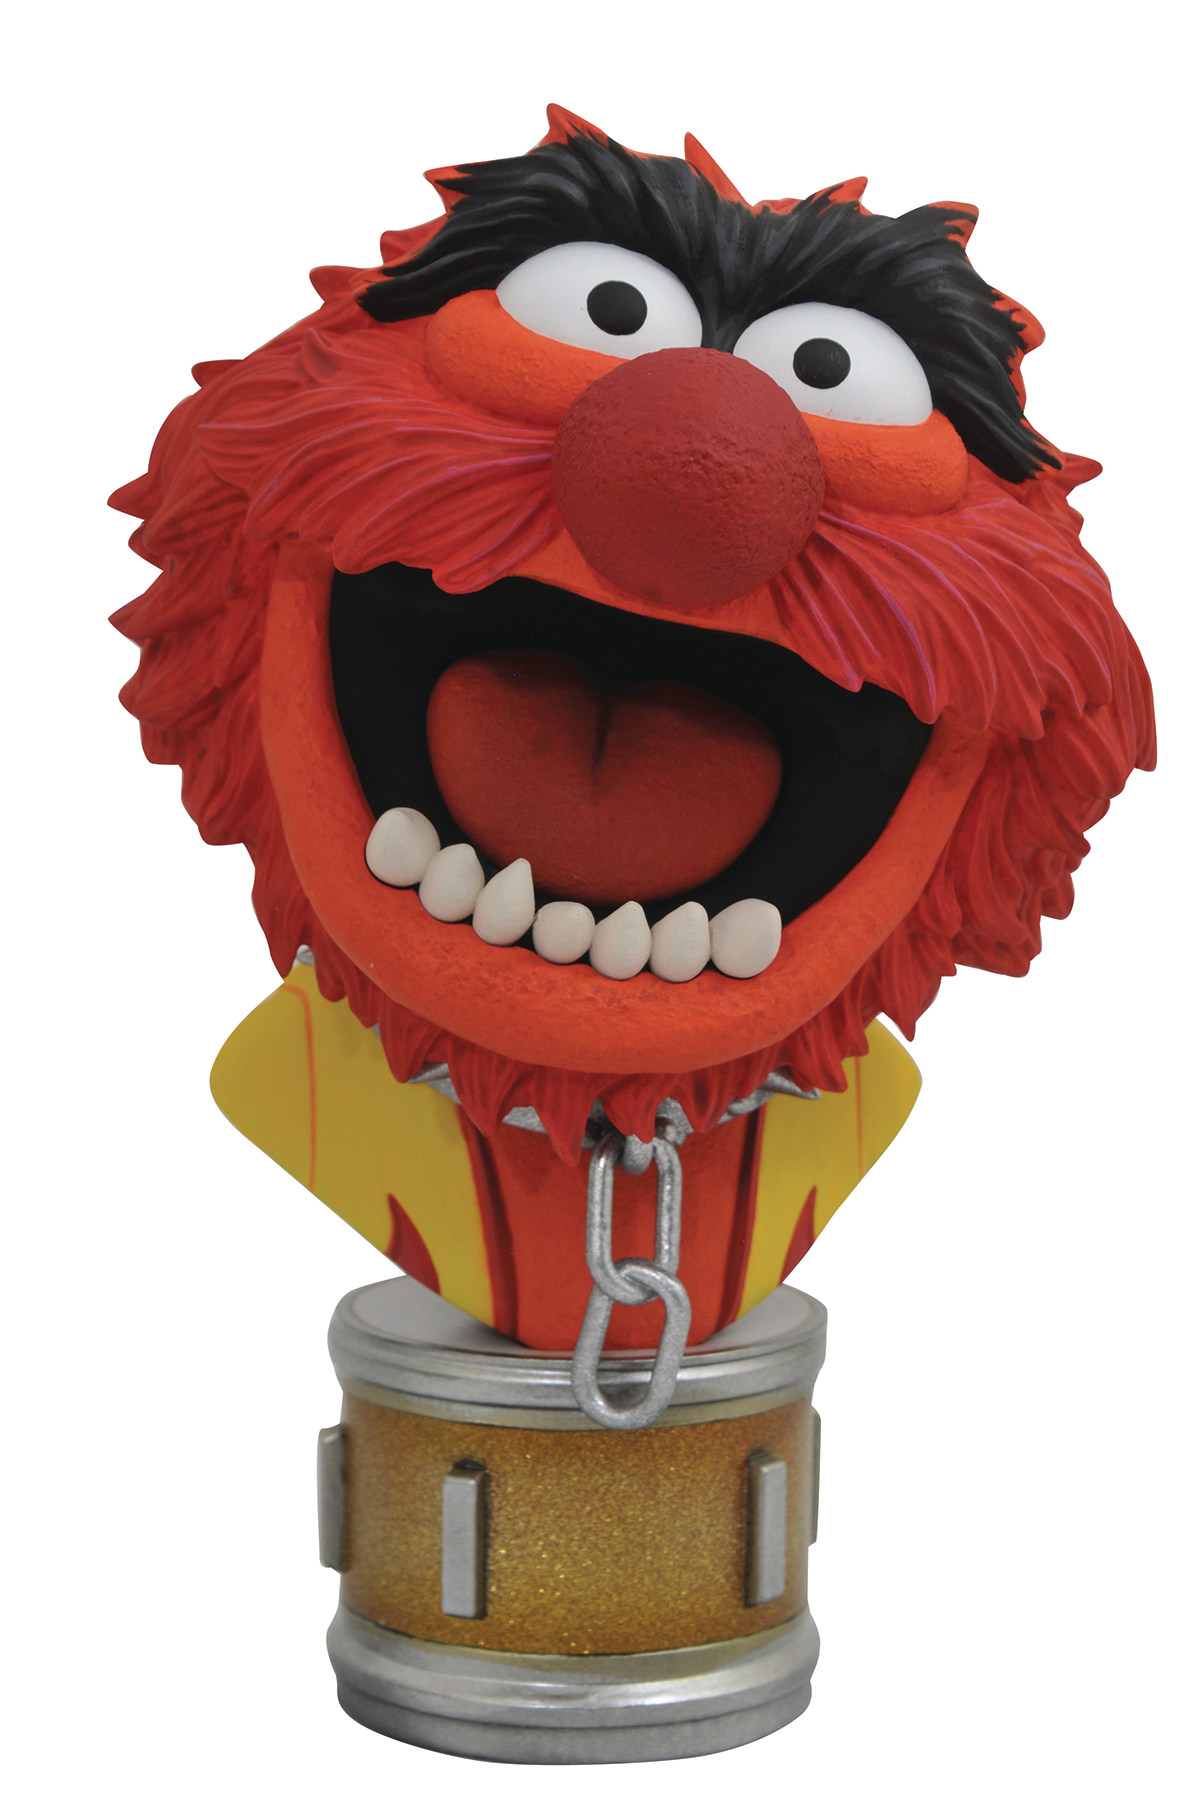 LEGENDS IN 3D MOVIE MUPPETS ANIMAL 1/2 SCALE BUST